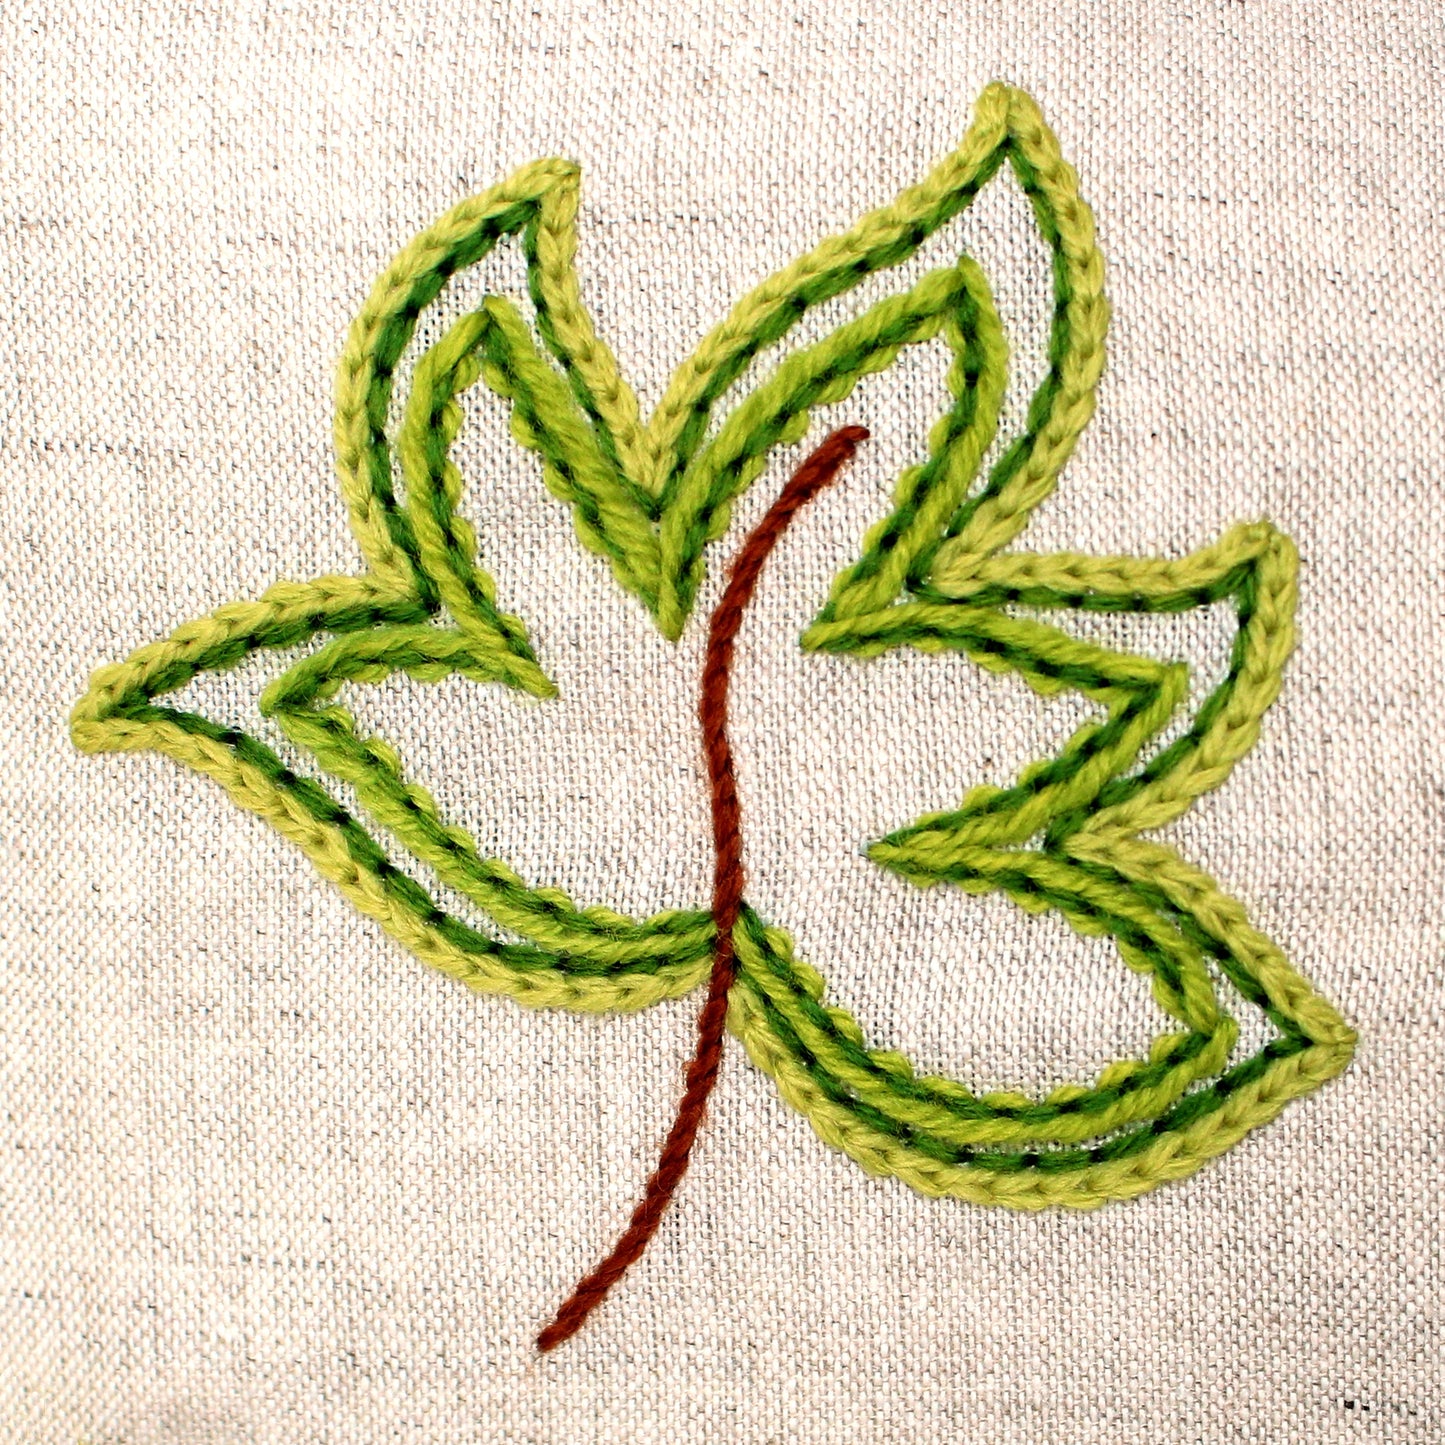 'Maple' Crewel Work Embroidery Pattern